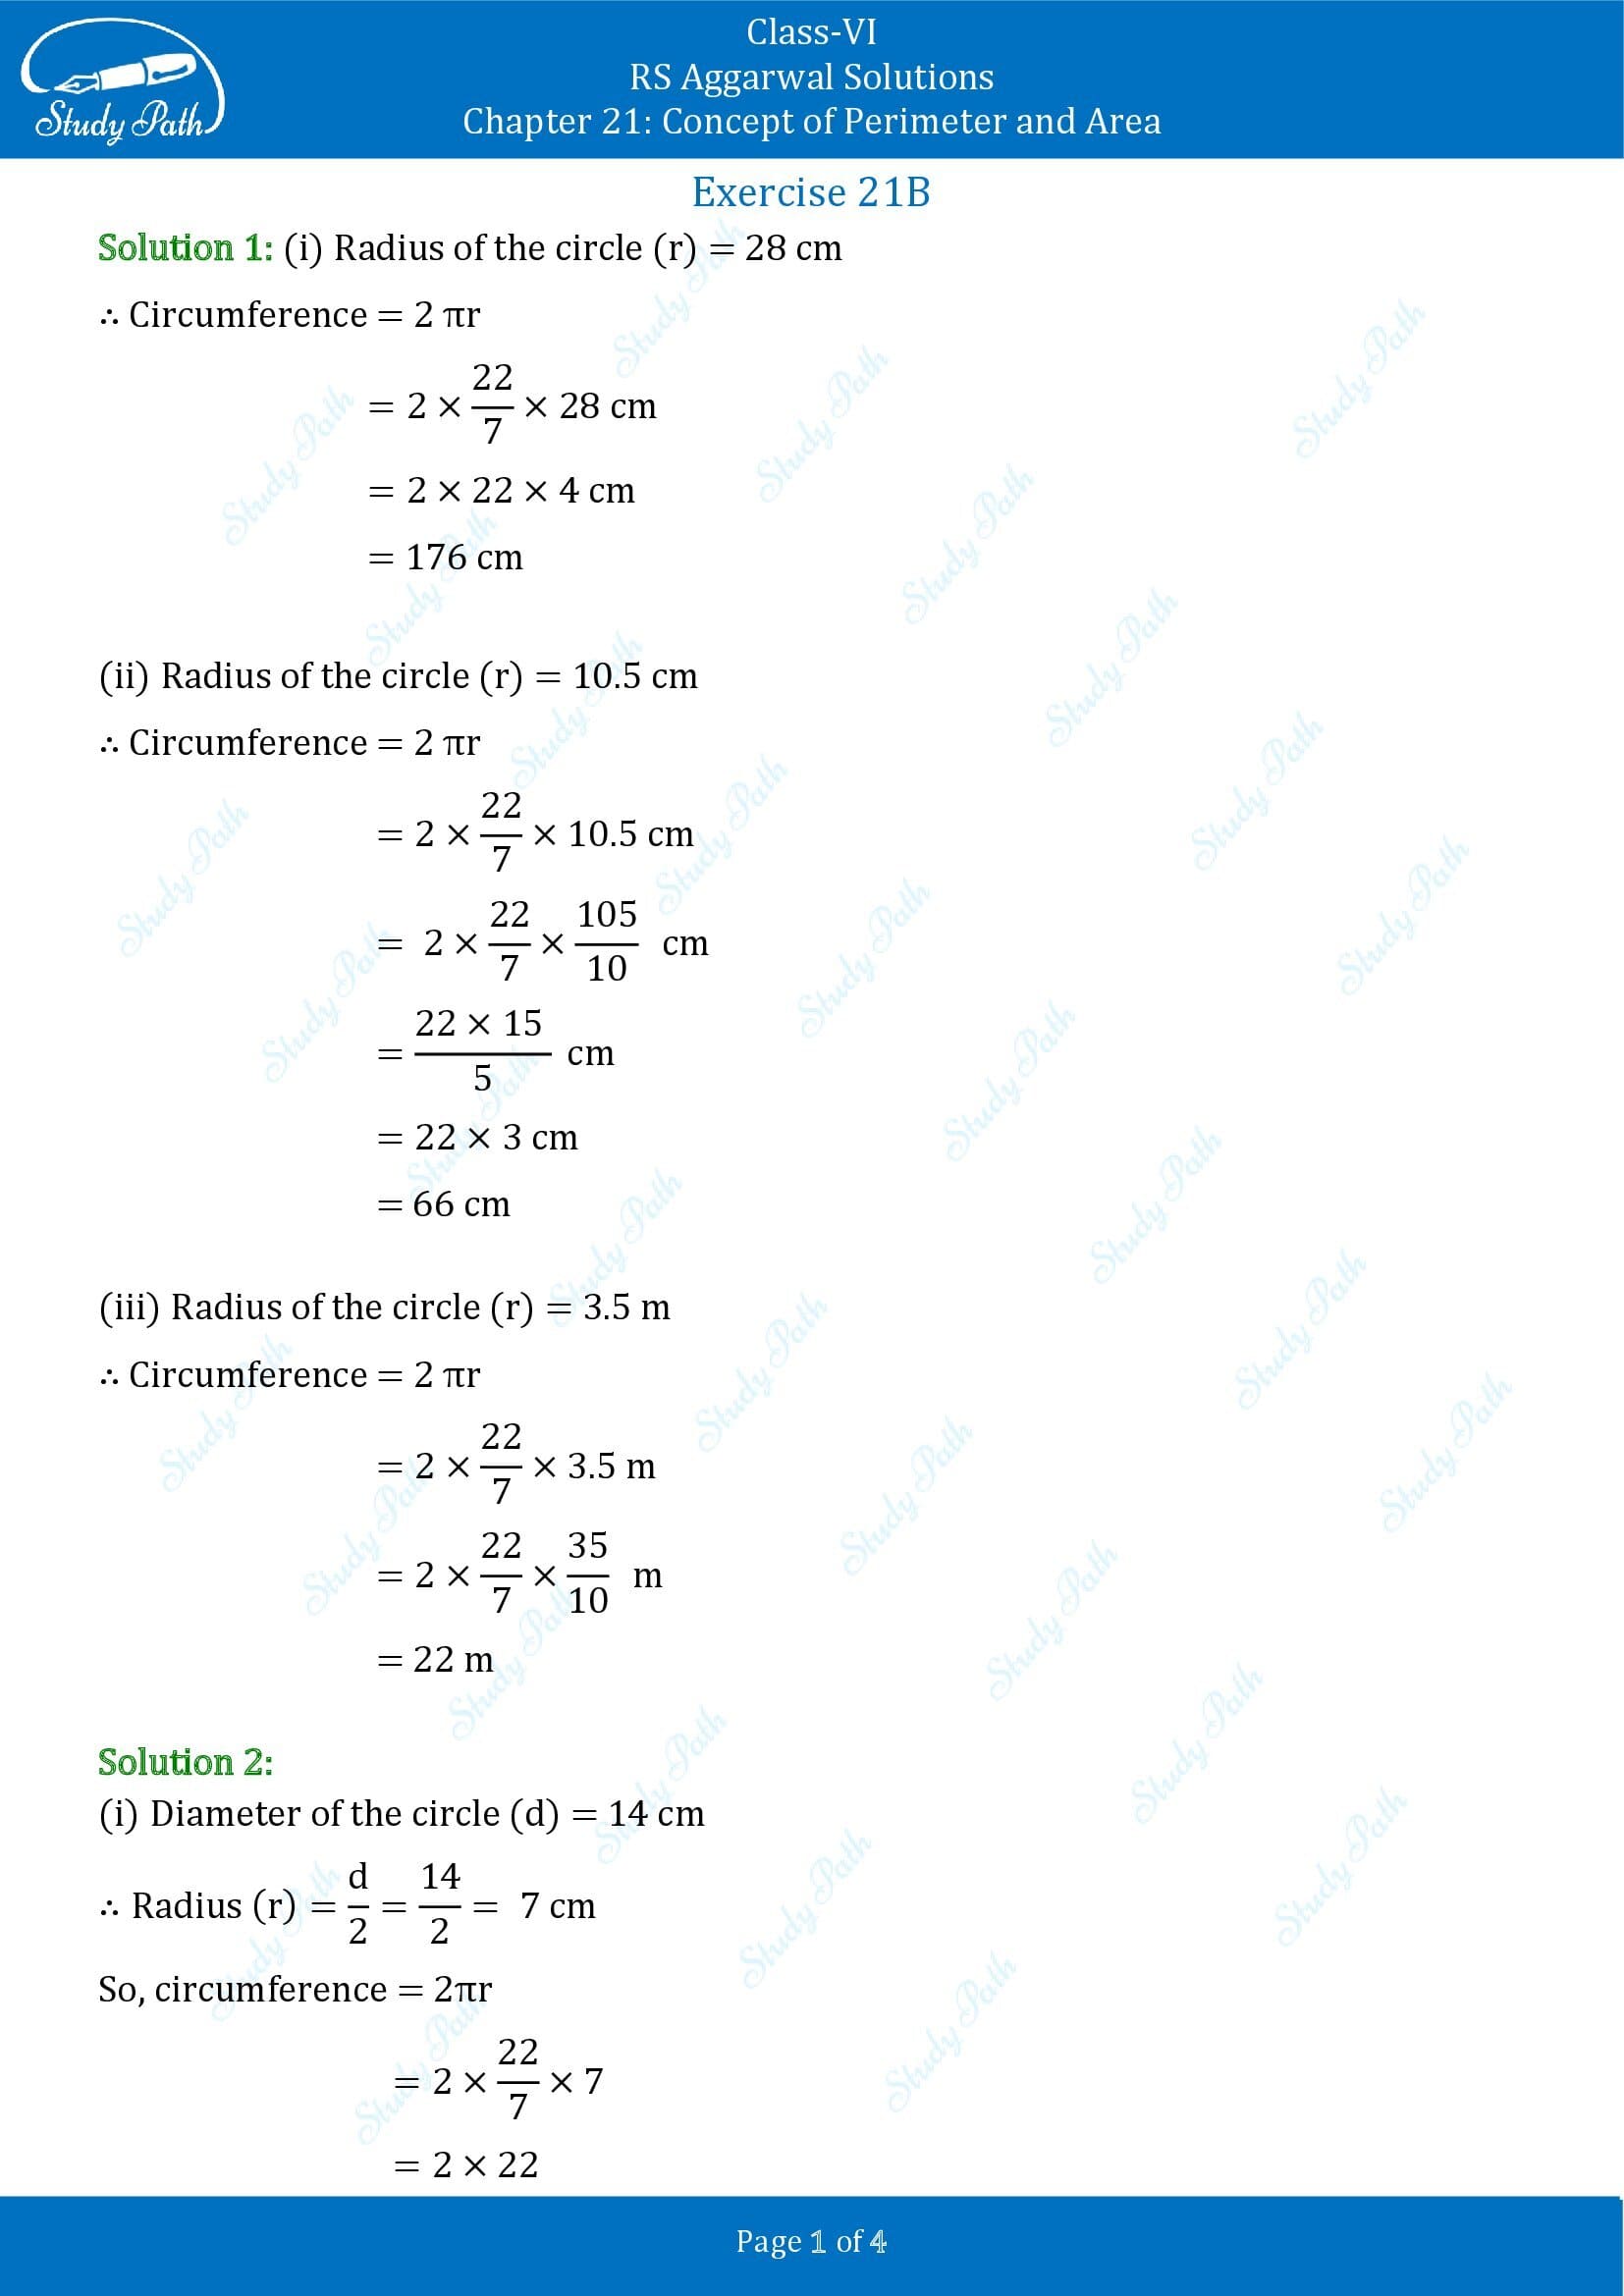 RS Aggarwal Solutions Class 6 Chapter 21 Concept of Perimeter and Area Exercise 21B 00001